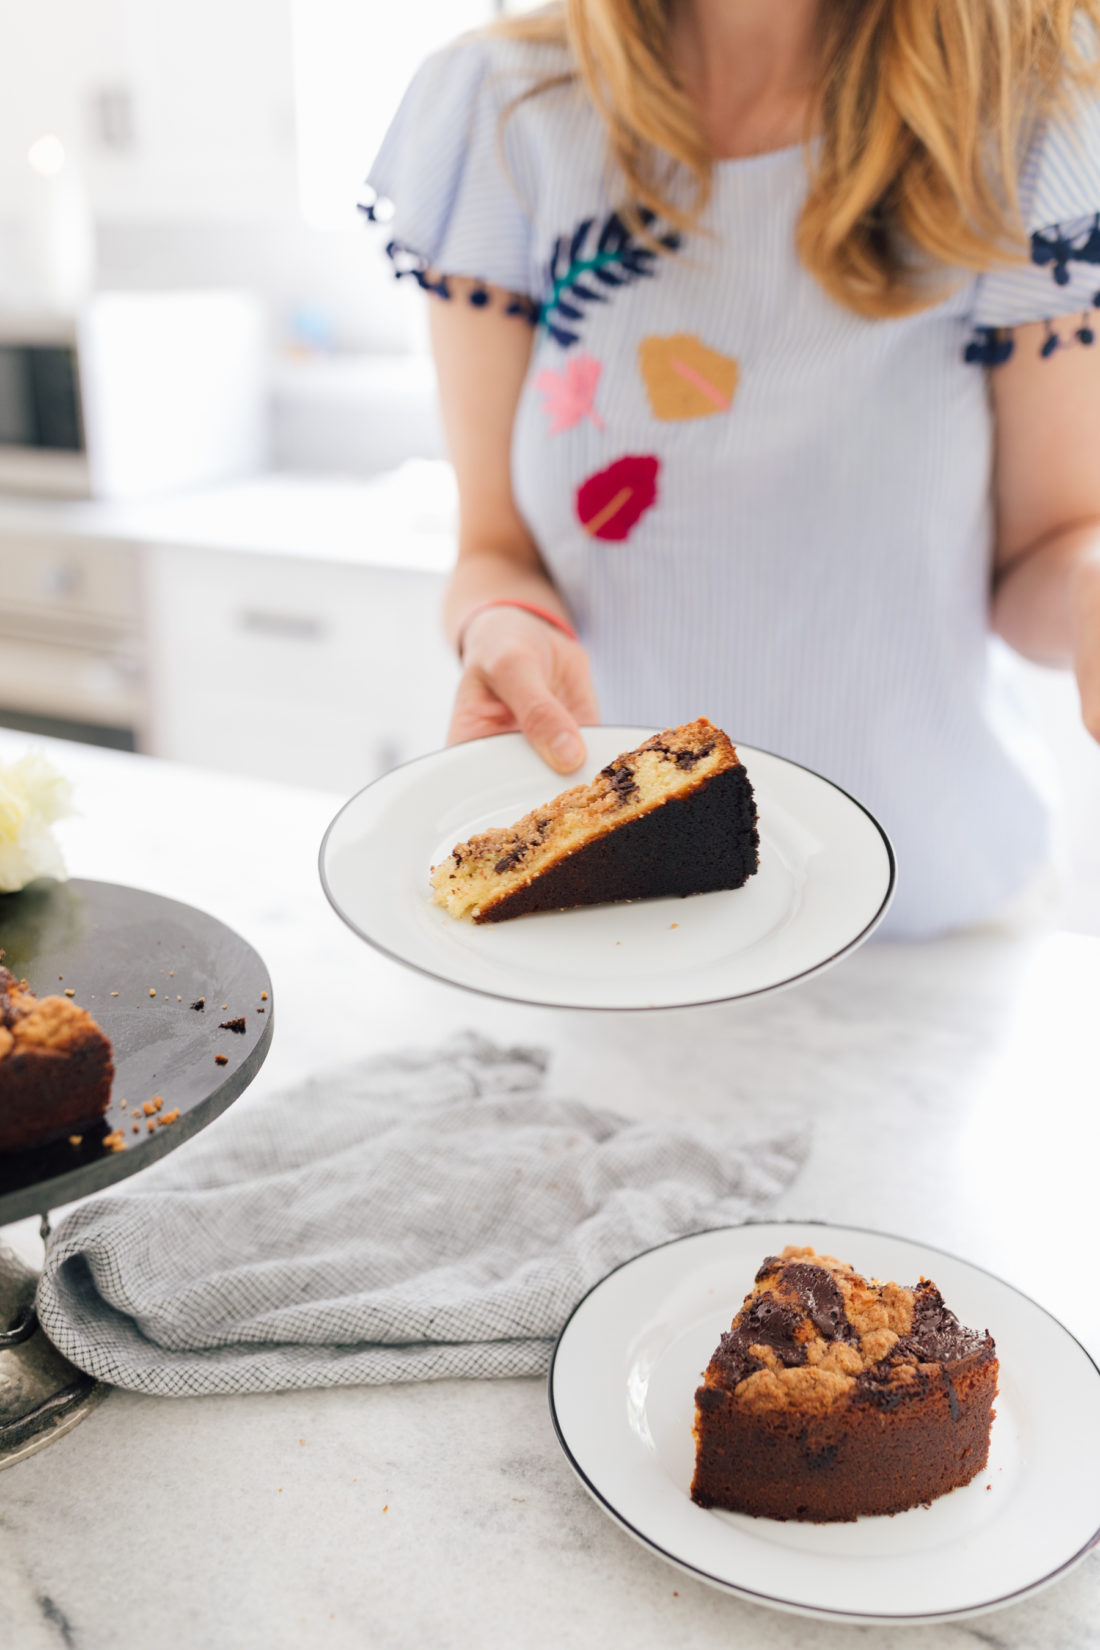 Eva Amurri Martino holds a slice of coffee cake at her home in Connecticut